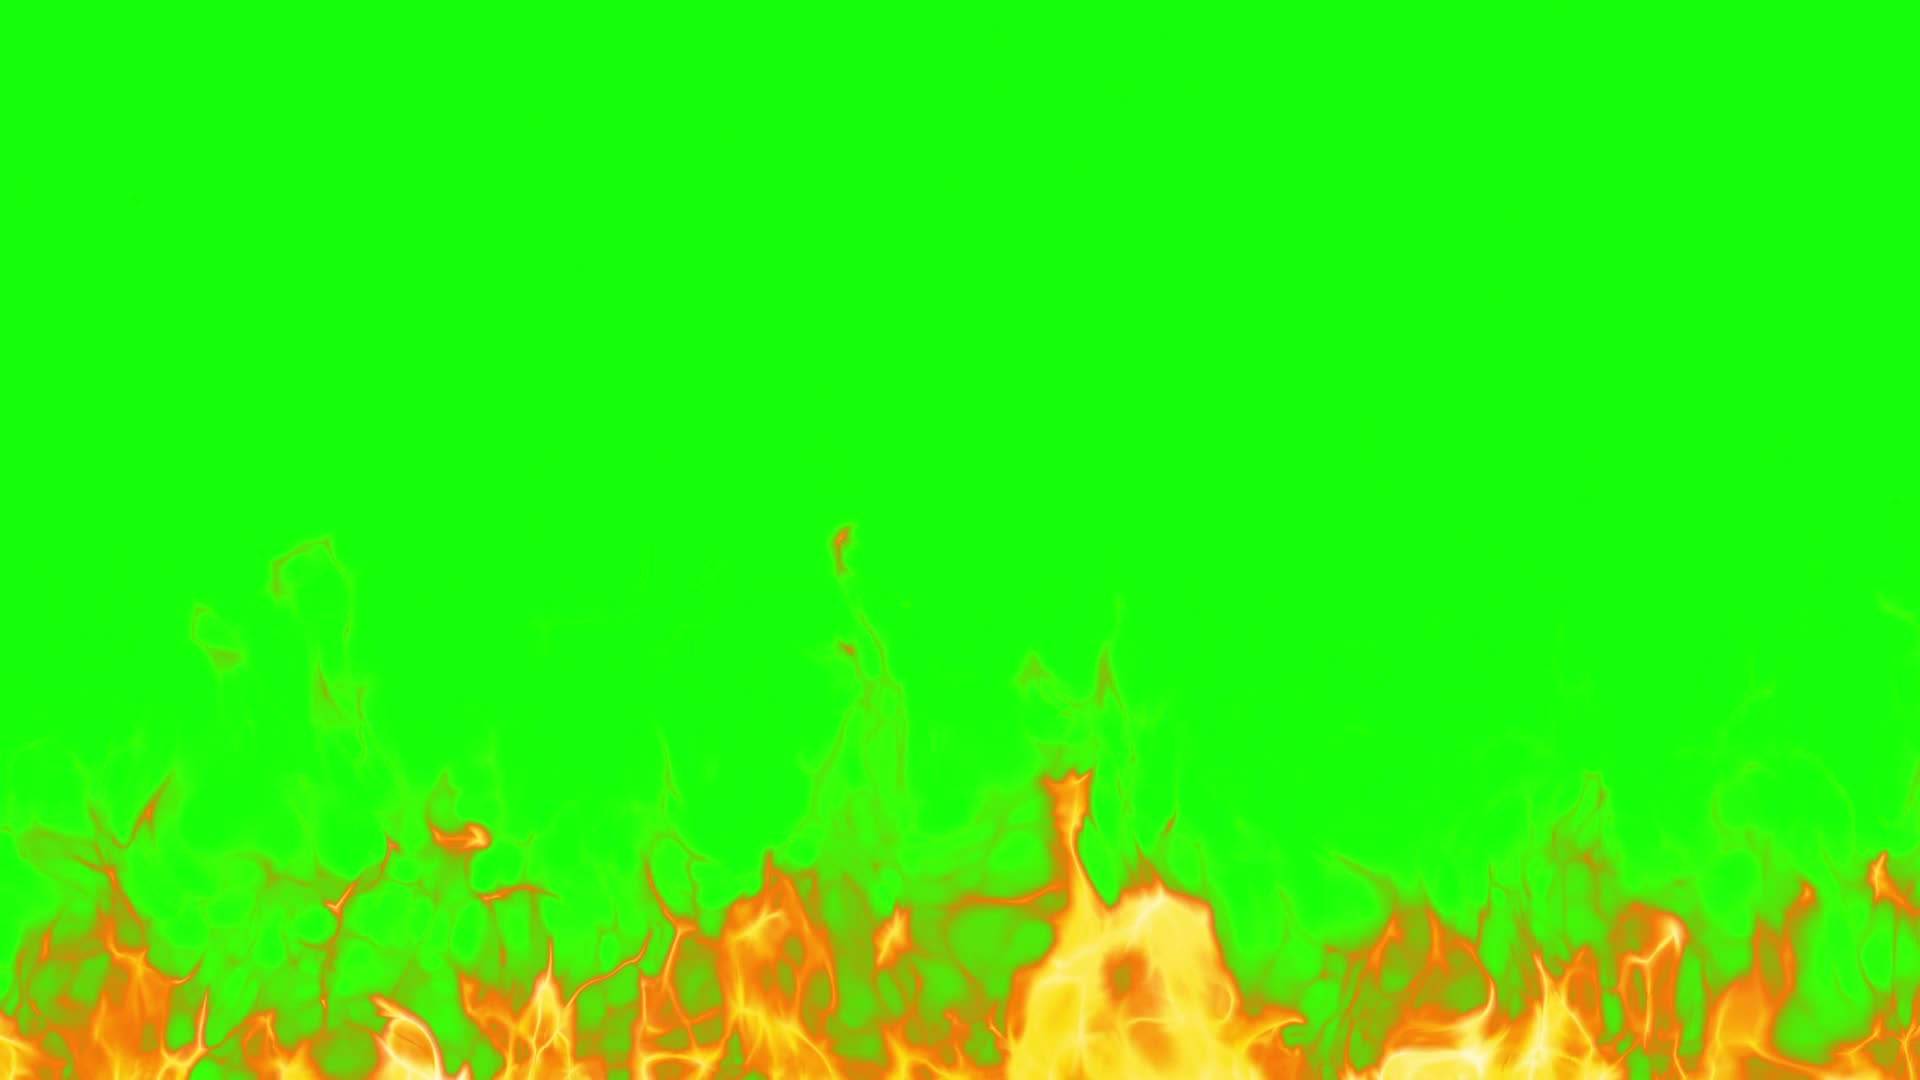 Green Screen With Flames